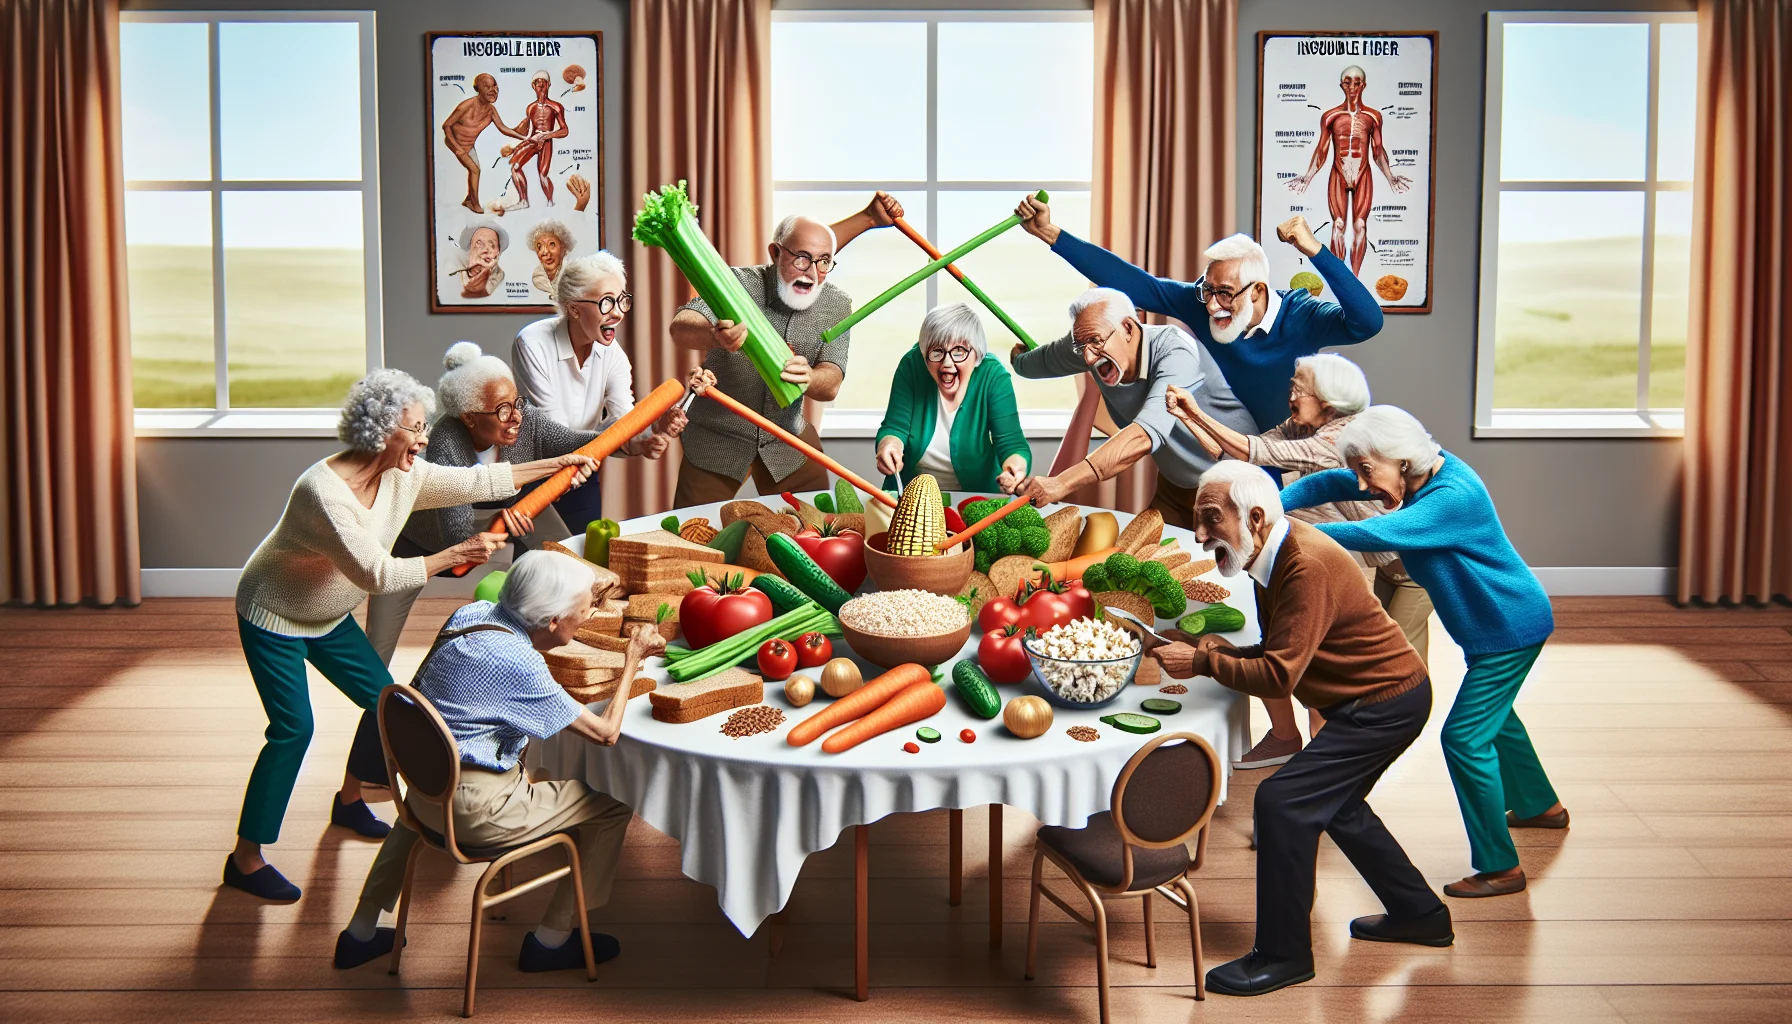 Create a whimsical and realistic scene in an elders' shared dining room. In this scene, a group of jovial senior citizens of diverse descents, including Caucasian, Hispanic, Black, Middle-Eastern, South Asian, are gathered around a large, round table. They are humorously fighting over a plate of foods high in insoluble fiber such as whole wheat bread, brown rice, carrots, cucumbers, and tomatoes. One senior, a Caucasian woman, uses a celery stick as a sword, while a Middle-Eastern man pretends to be a goalie, guarding a bowl of popcorn. The others display similarly playful interactions with fruits, vegetables, and grains. Throughout the room, informative posters about the benefits of insoluble fiber can be seen.